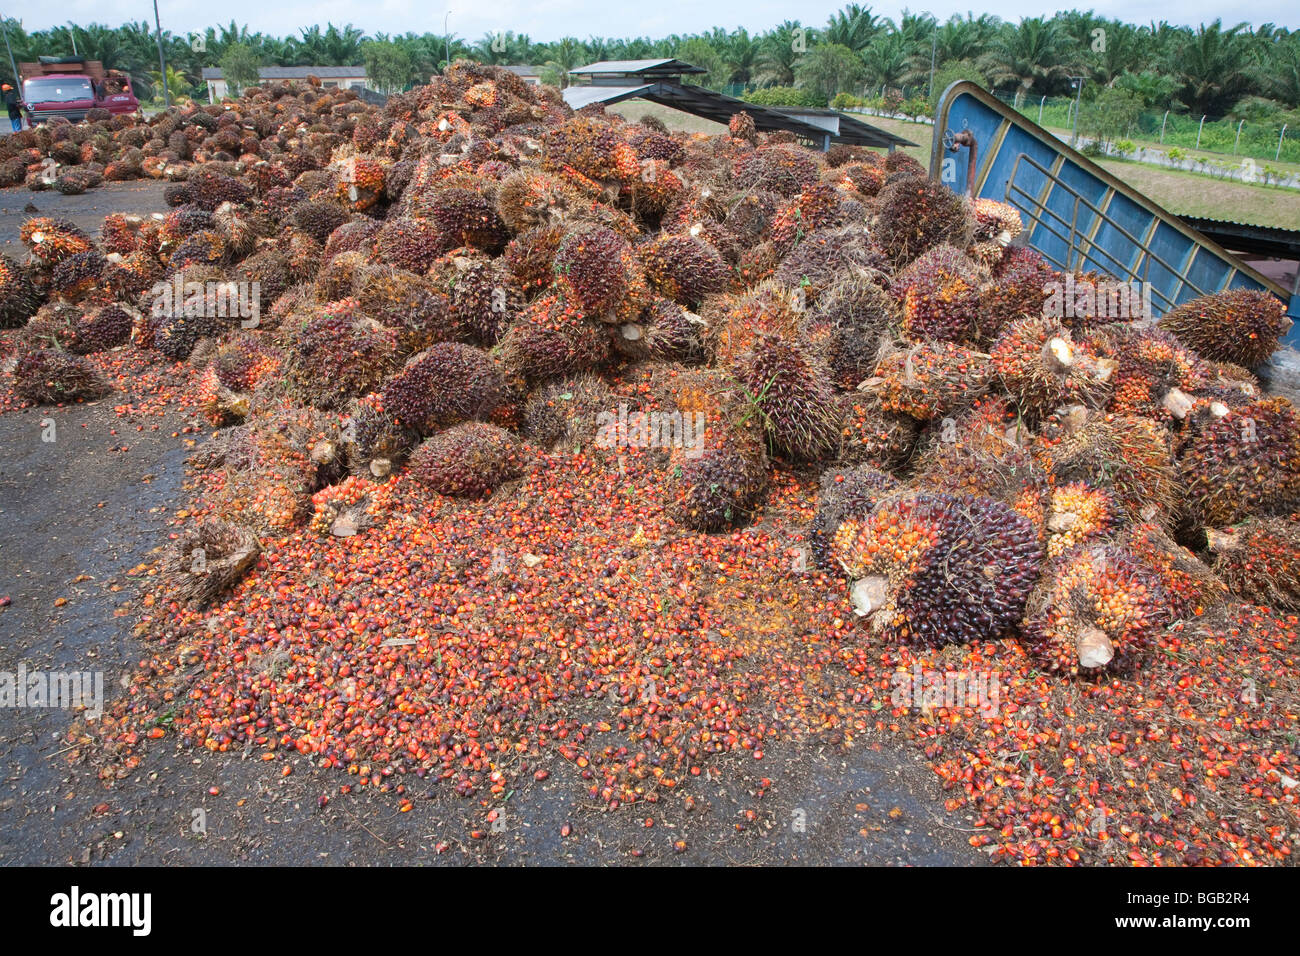 Pile of oil palm fresh fruit bunches (FFBs) and loose fruits await inspection and processing at mill. Sindora Palm Oil Mill Stock Photo